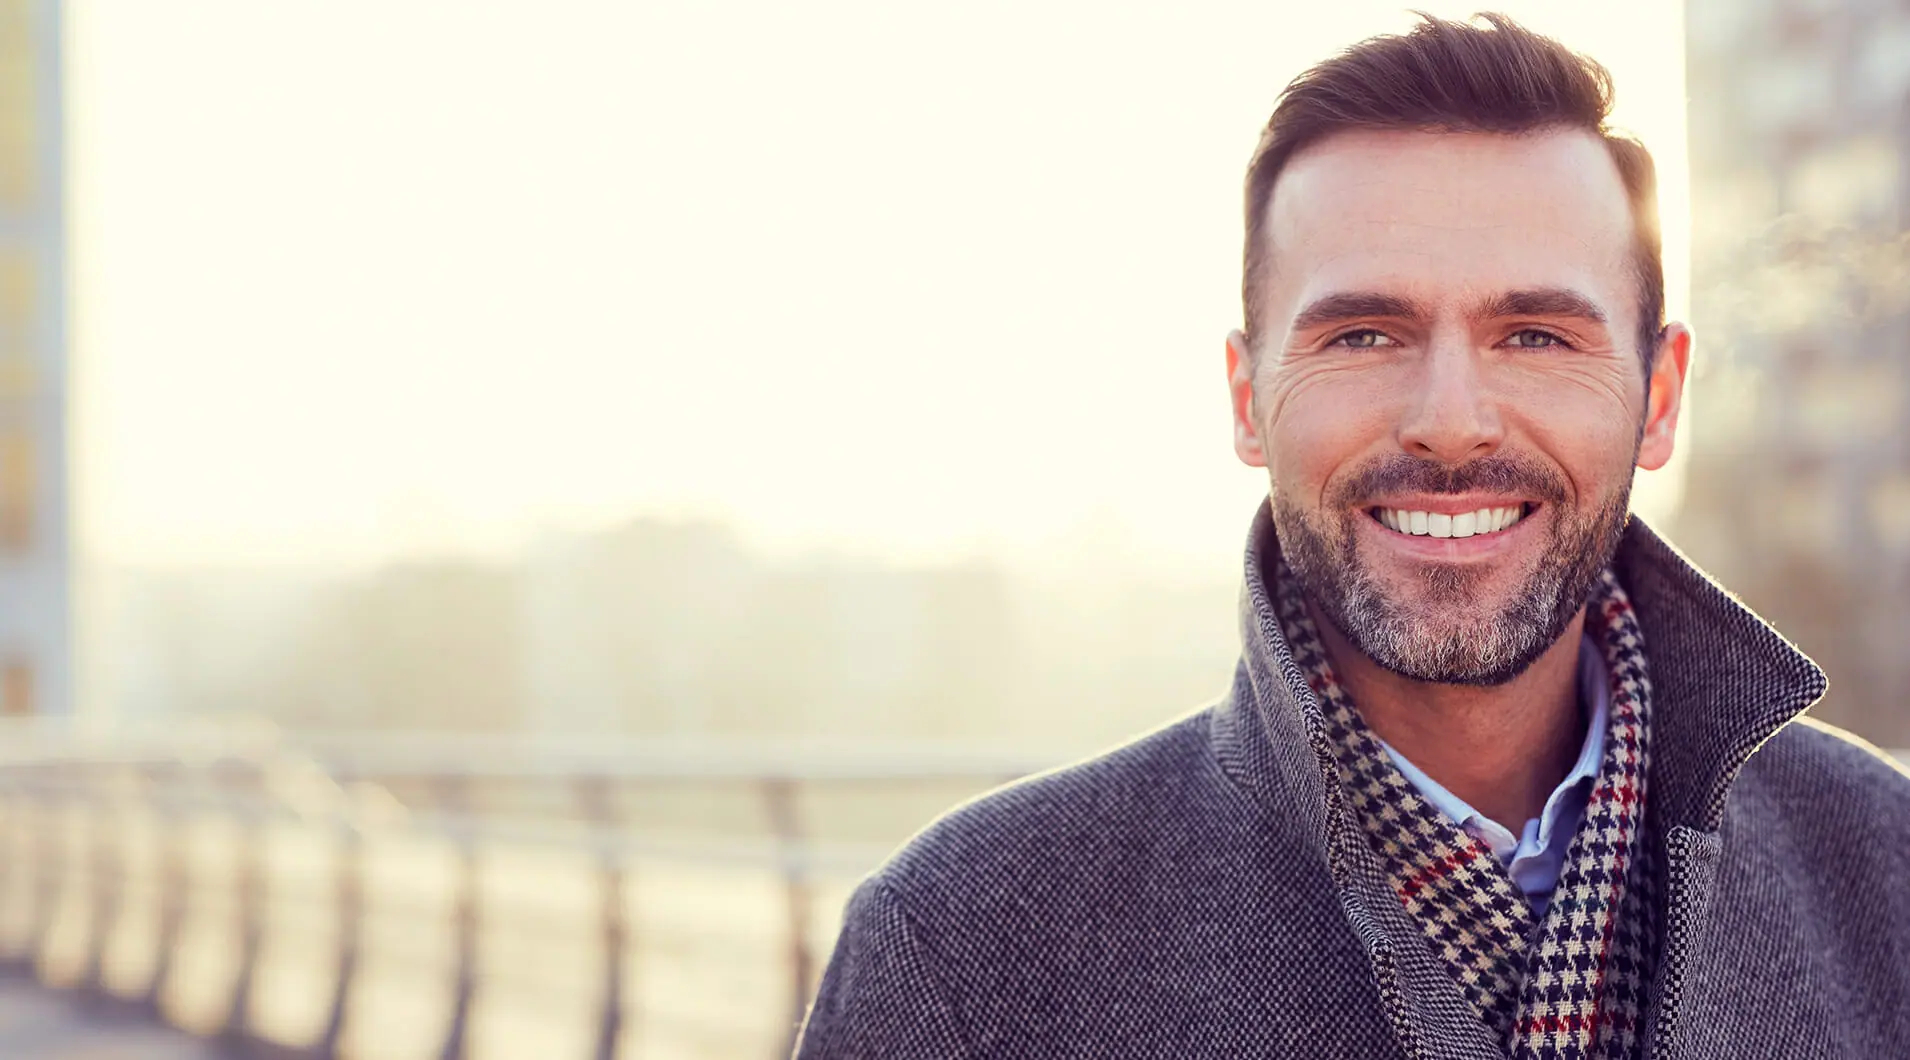 Middle Aged Man in Jacket Outside Smiling | Botox for Men - Bakersfield CA